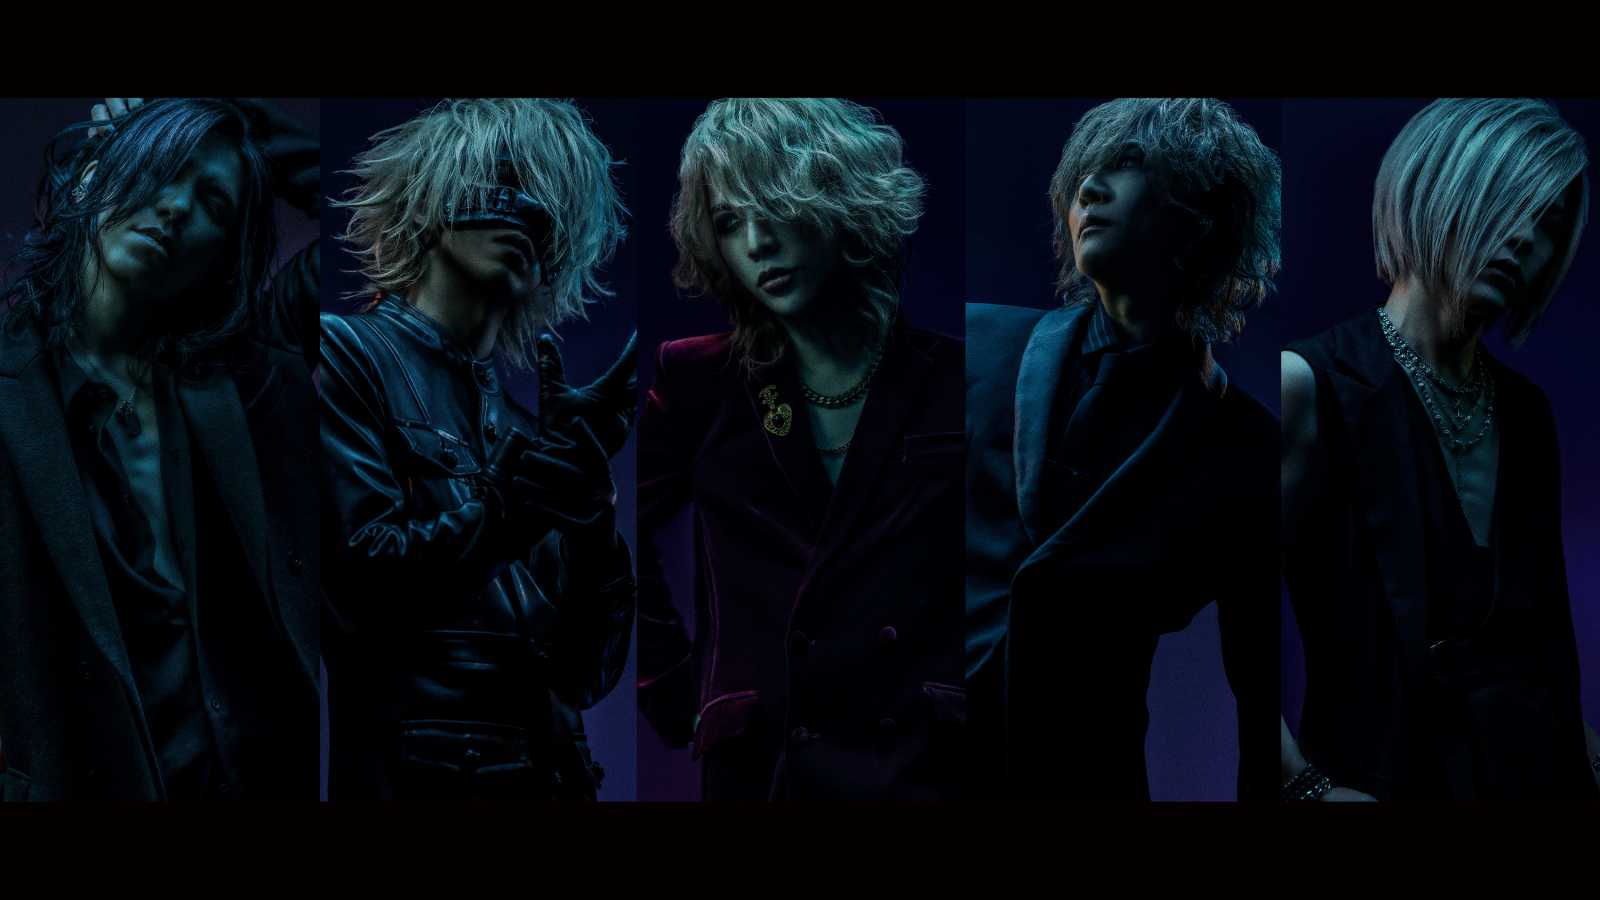 Widea the GazettE na Crunchyroll © Sony Music Entertainment (Japan). All rights reserved.